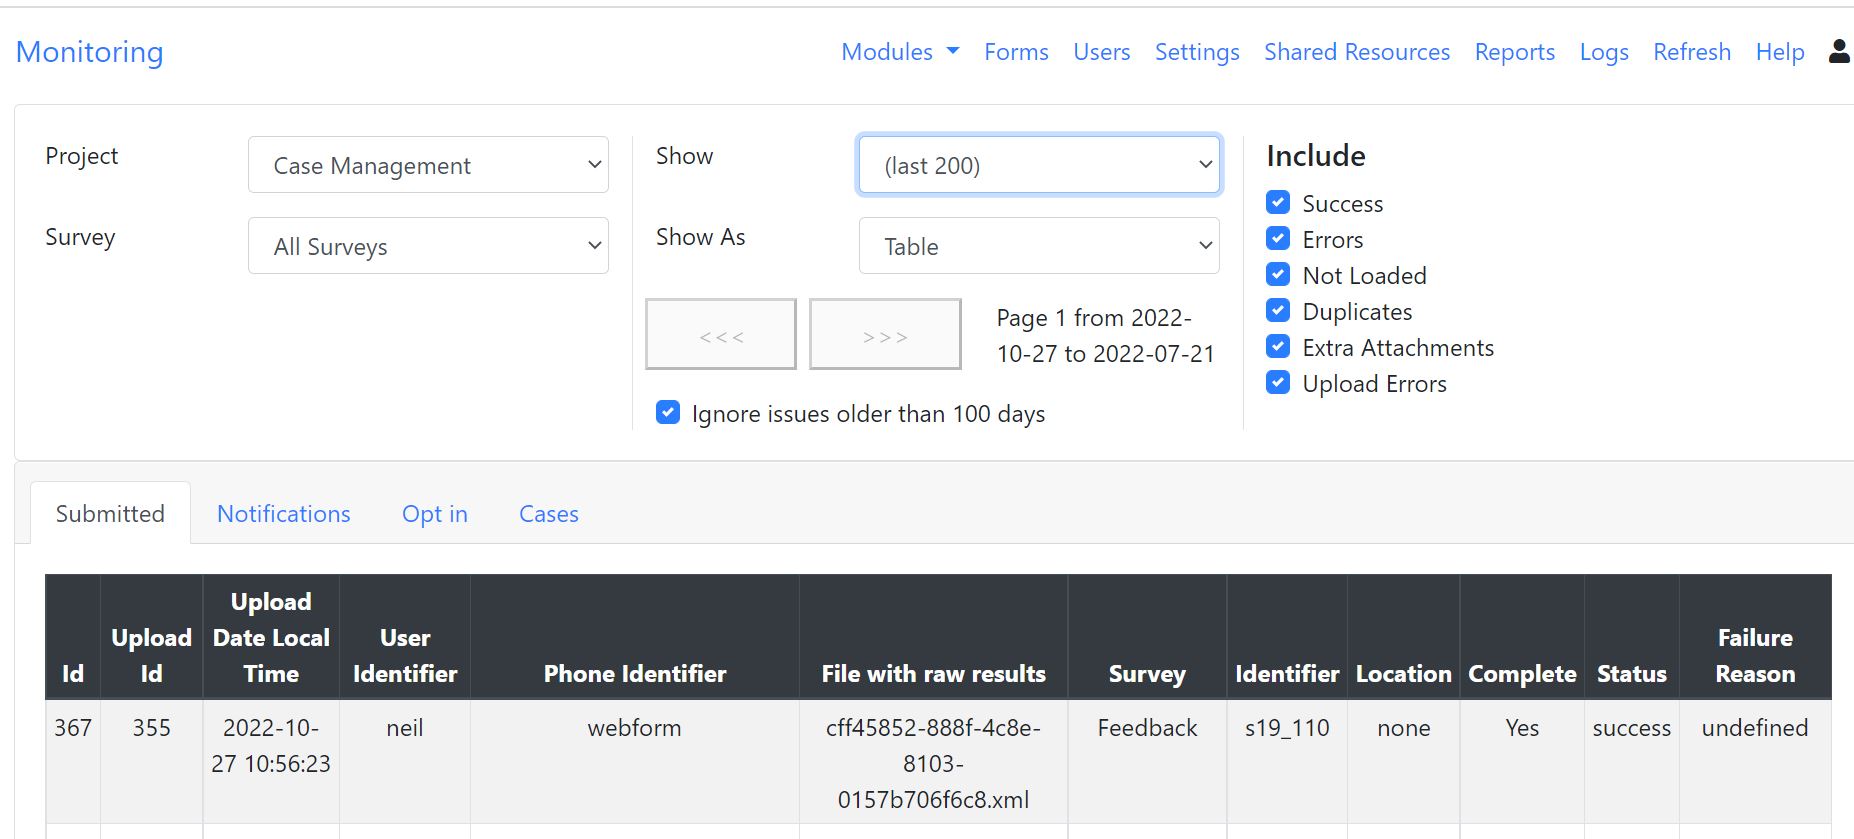 The monitoring page showing submission details